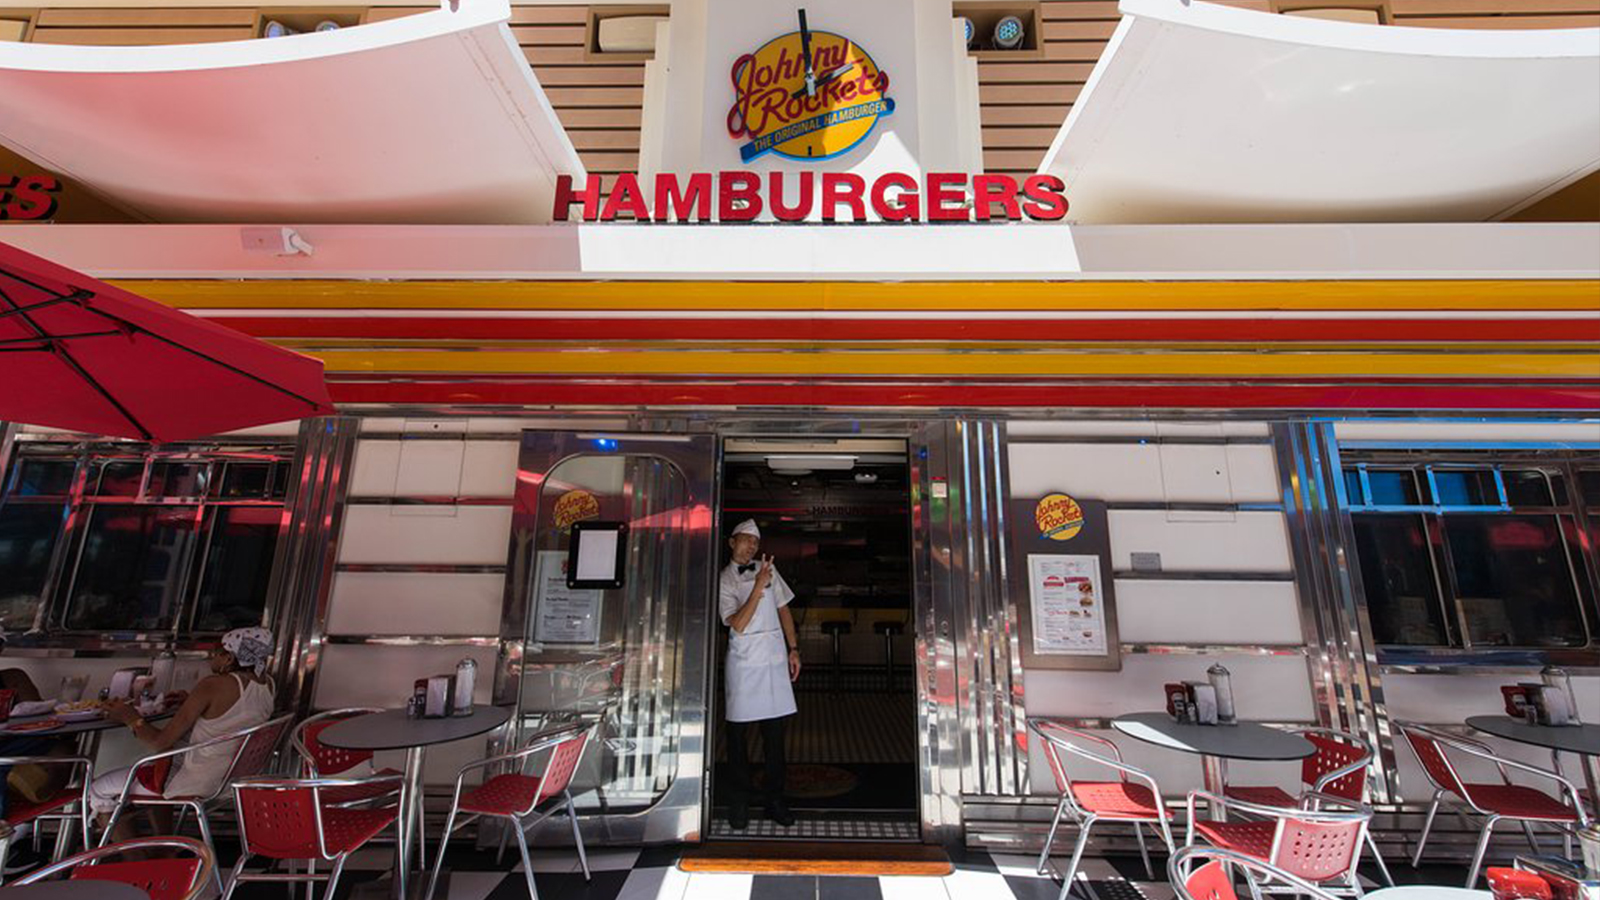 Johnny Rockets on the 